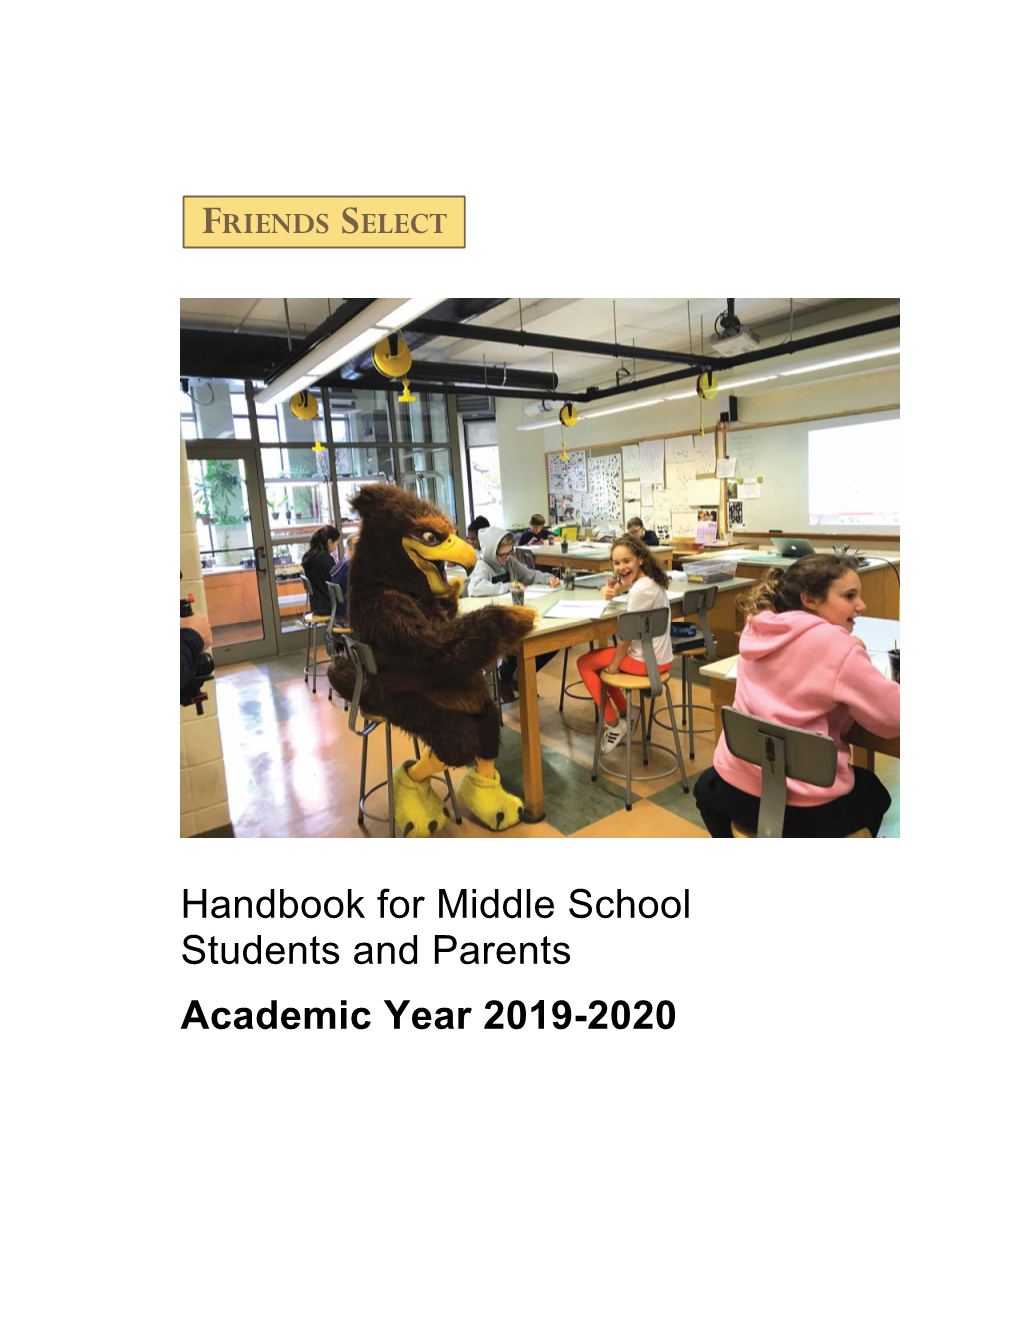 Handbook for Middle School Students and Parents Academic Year 2019